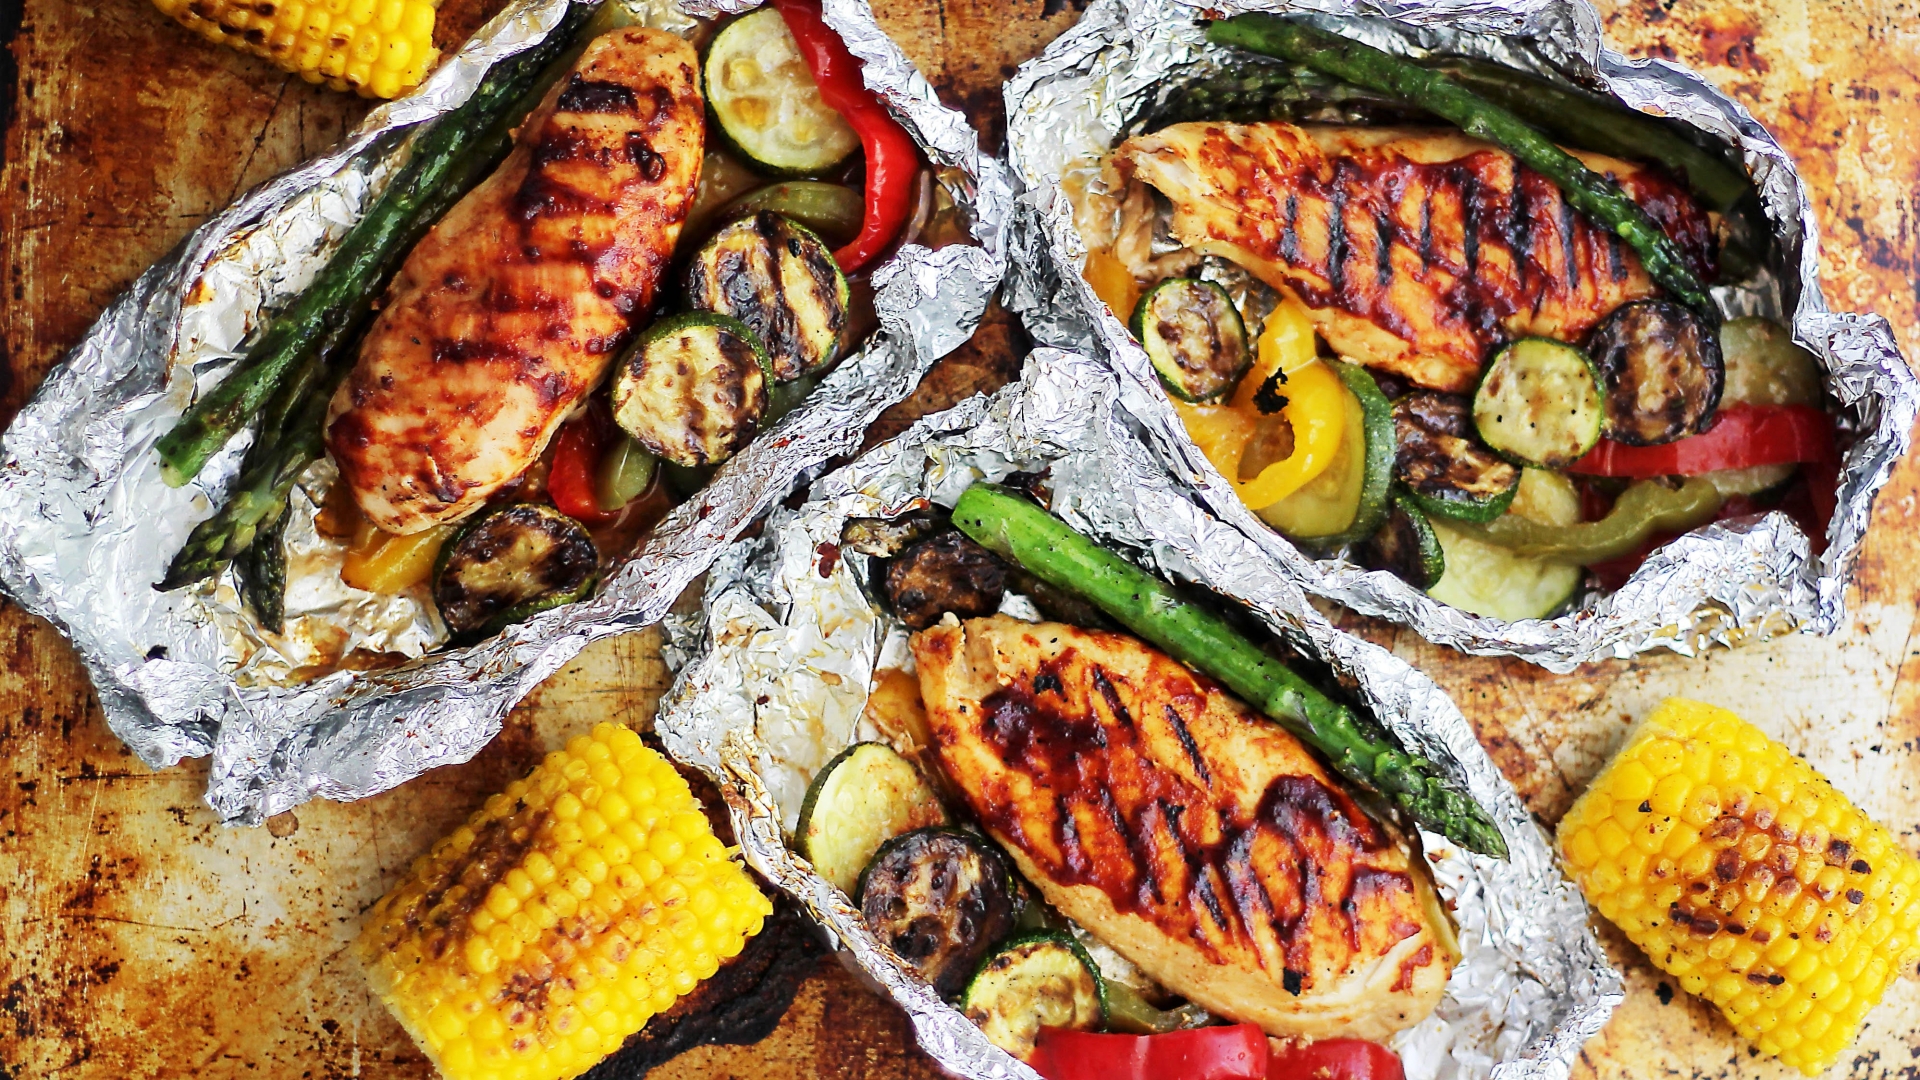 Grilled chicken and vegetables sitting in foil packets